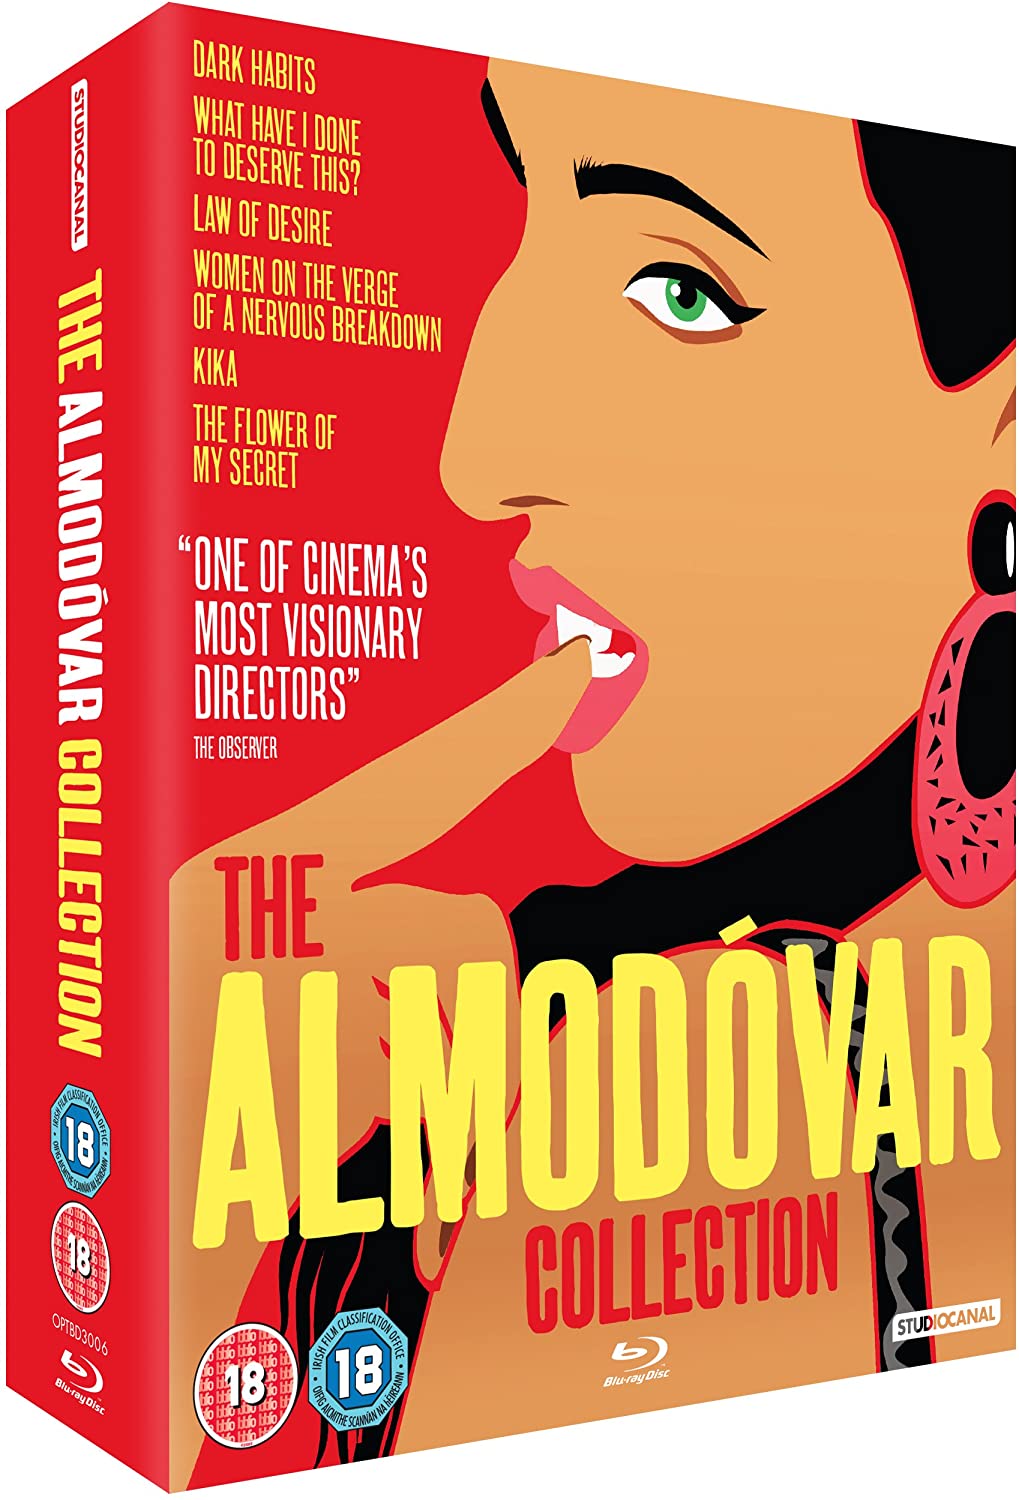 The Almodovar Collection - [Blu-ray]